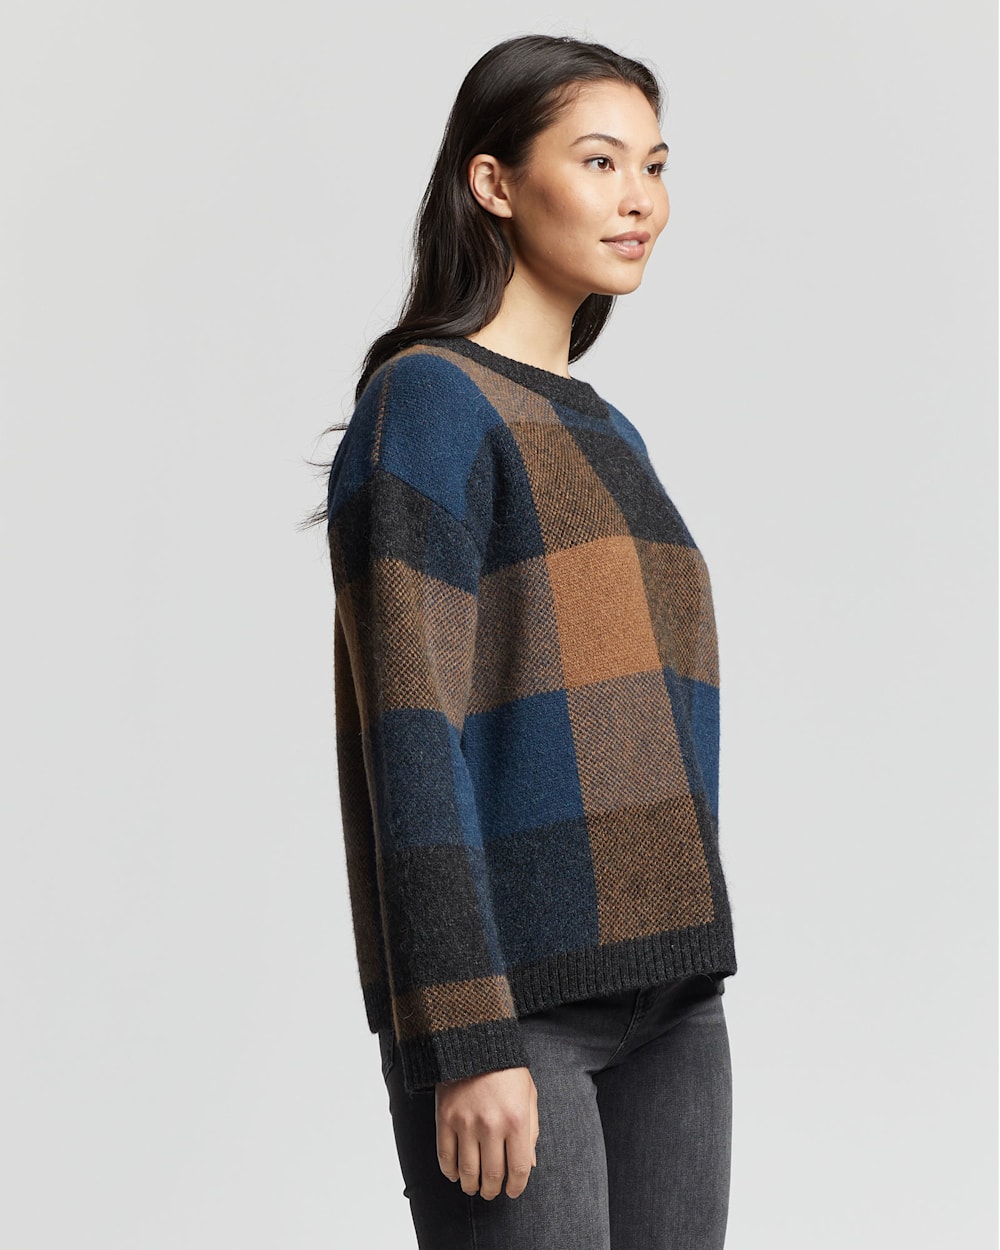 ALTERNATE VIEW OF WOMEN'S ALPACA CHECK SWEATER IN CHARCOAL MULTI image number 2